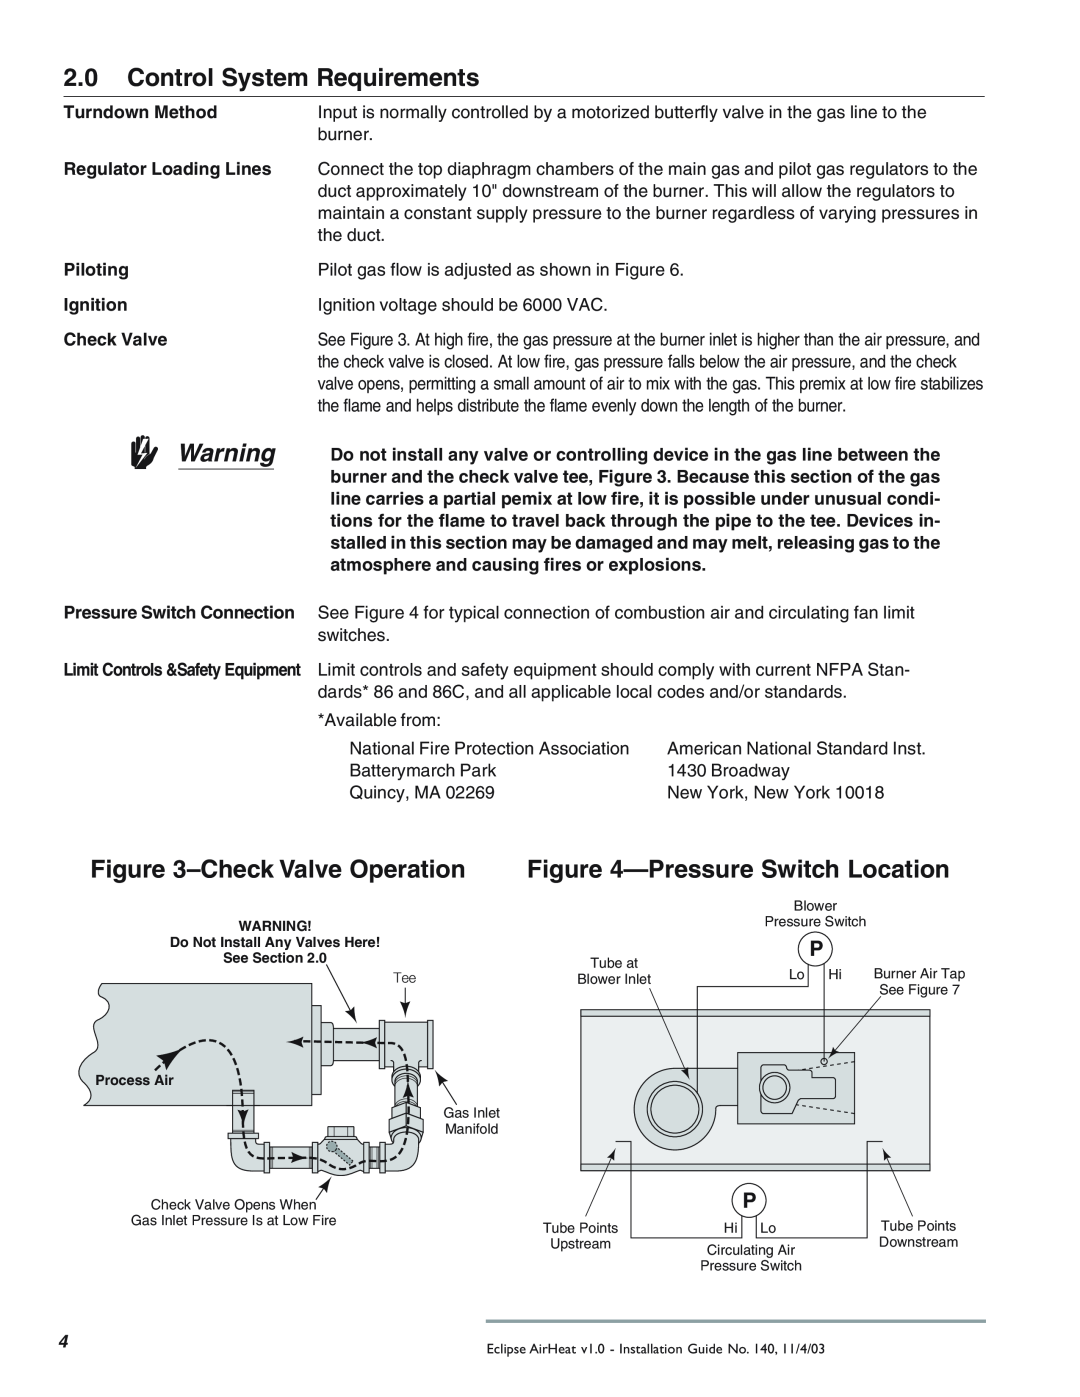 Eclipse Combustion TAH, CAH, DAH 2.0Control System Requirements, CheckValve Operation, PressureSwitch Location, wWarning 